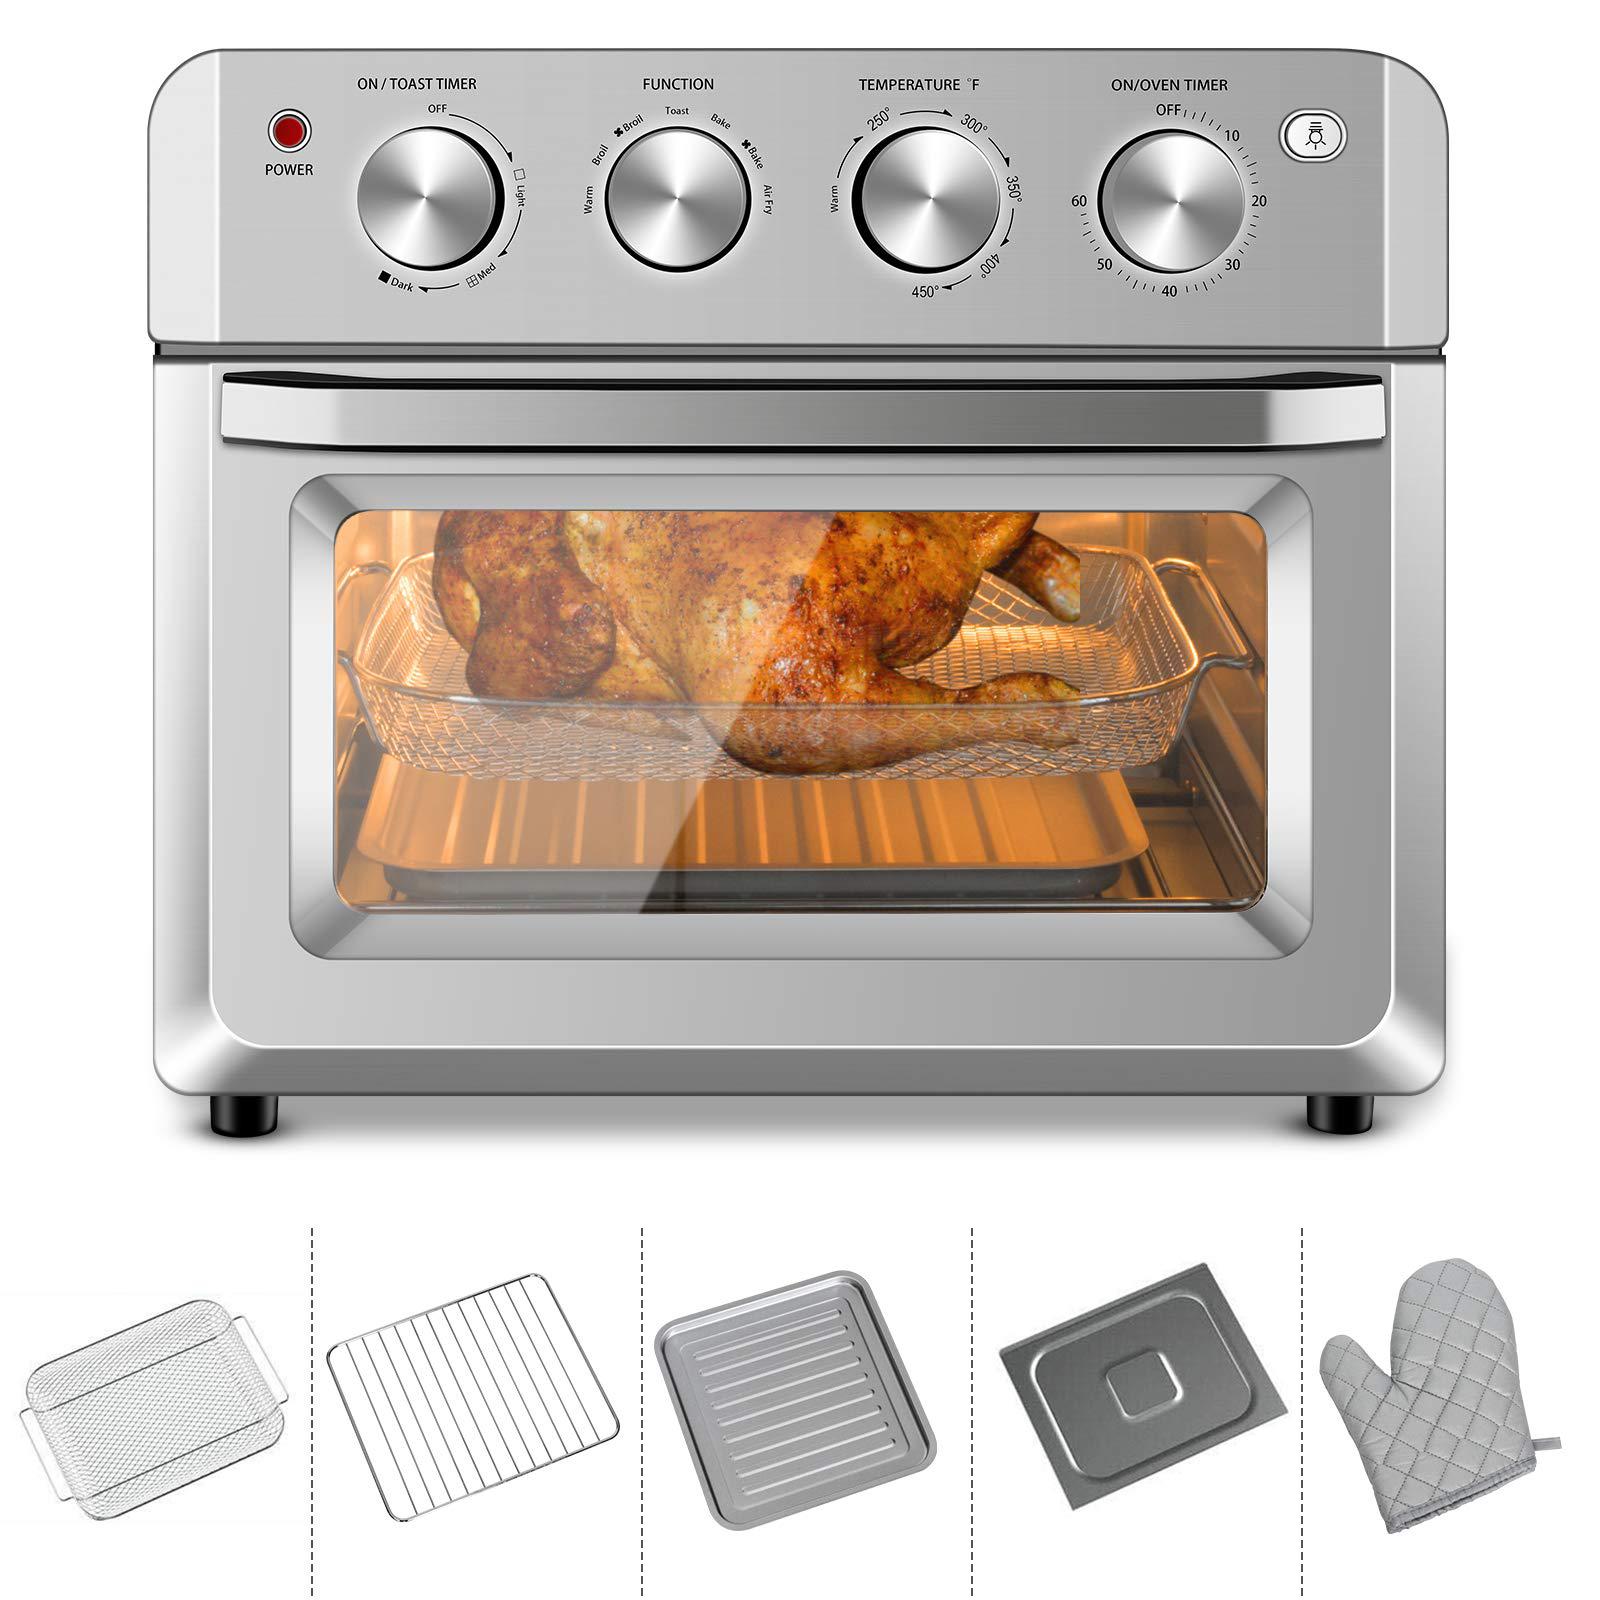 mat expert 7 in 1 convection air toaster oven, 1550w 19 qt countertop oven toast cooker w/1-60 min timer, 250-450f temp contr